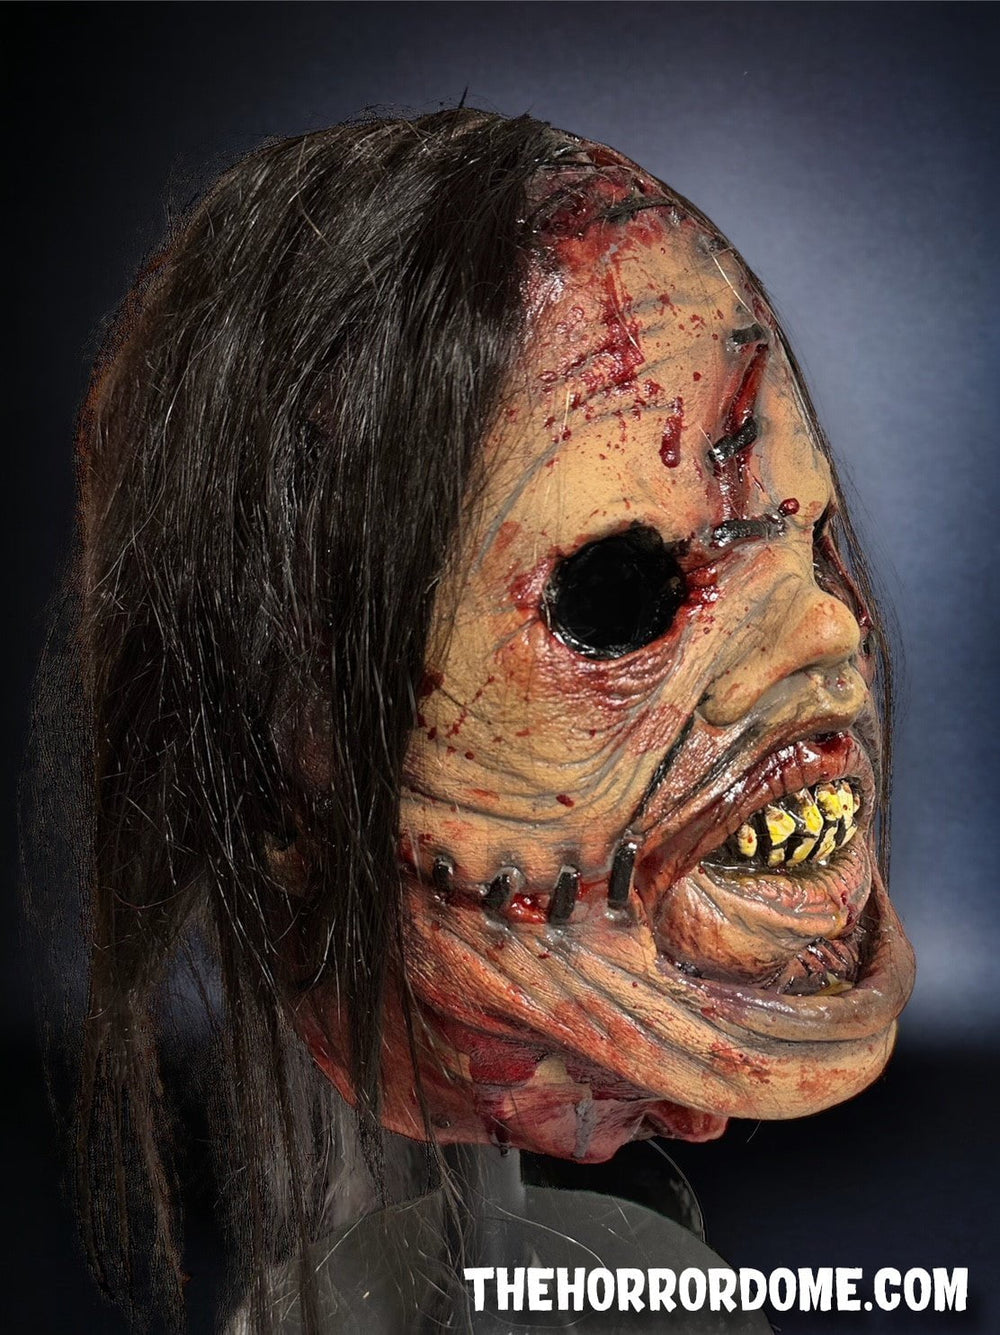 Deluxe Studio Leatherface Mask- Only 50 will be made